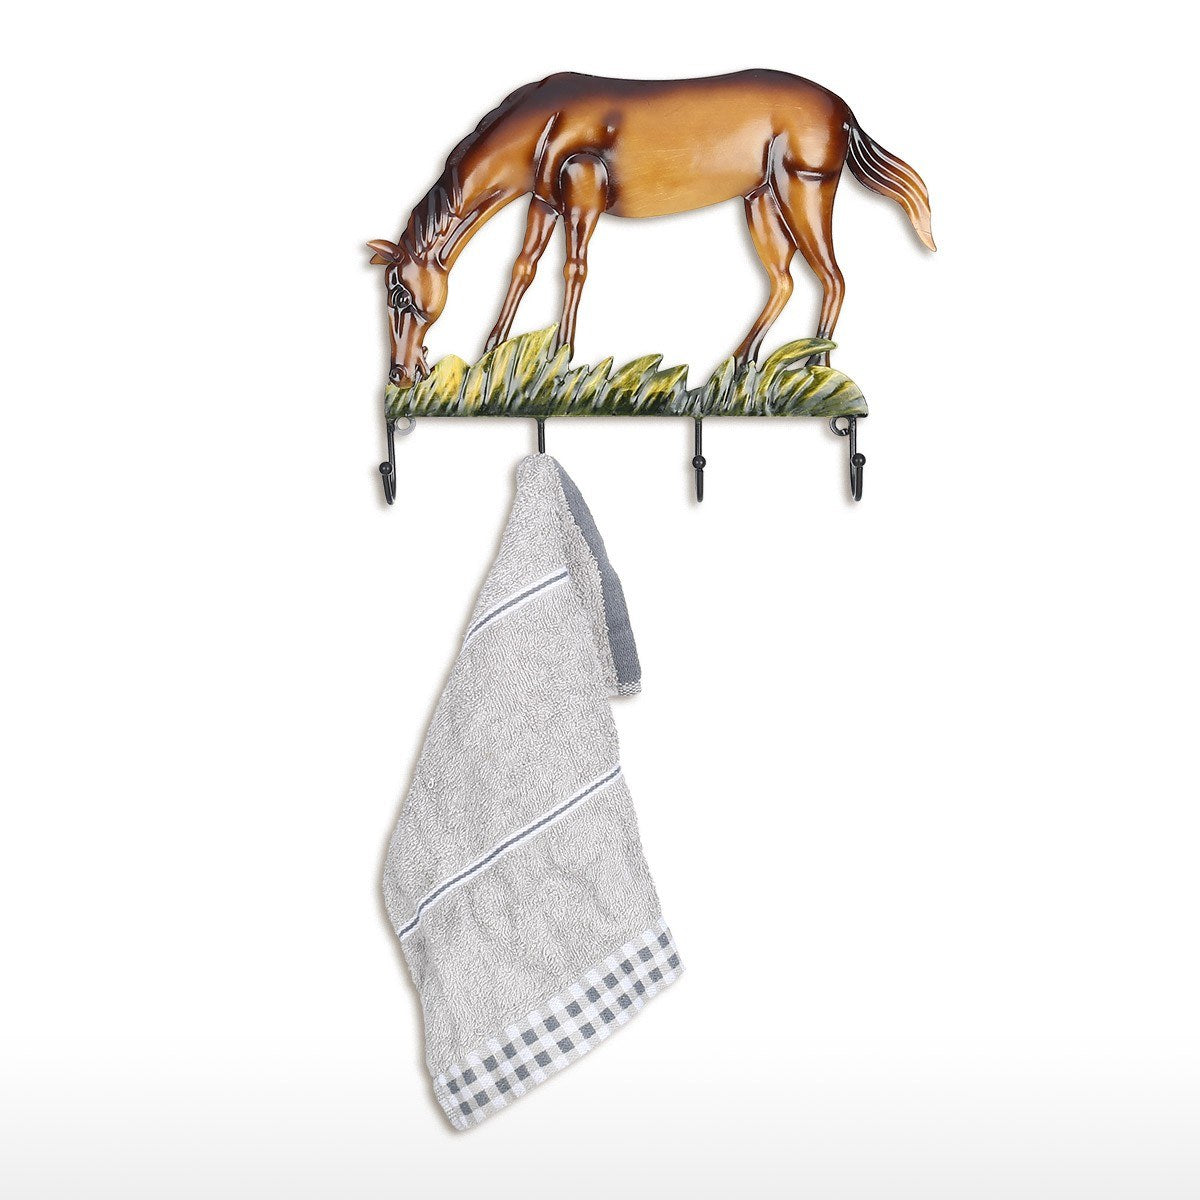 Hang them on our horse key hook, designed with a vintage look to make your room feel stylish and adventurous